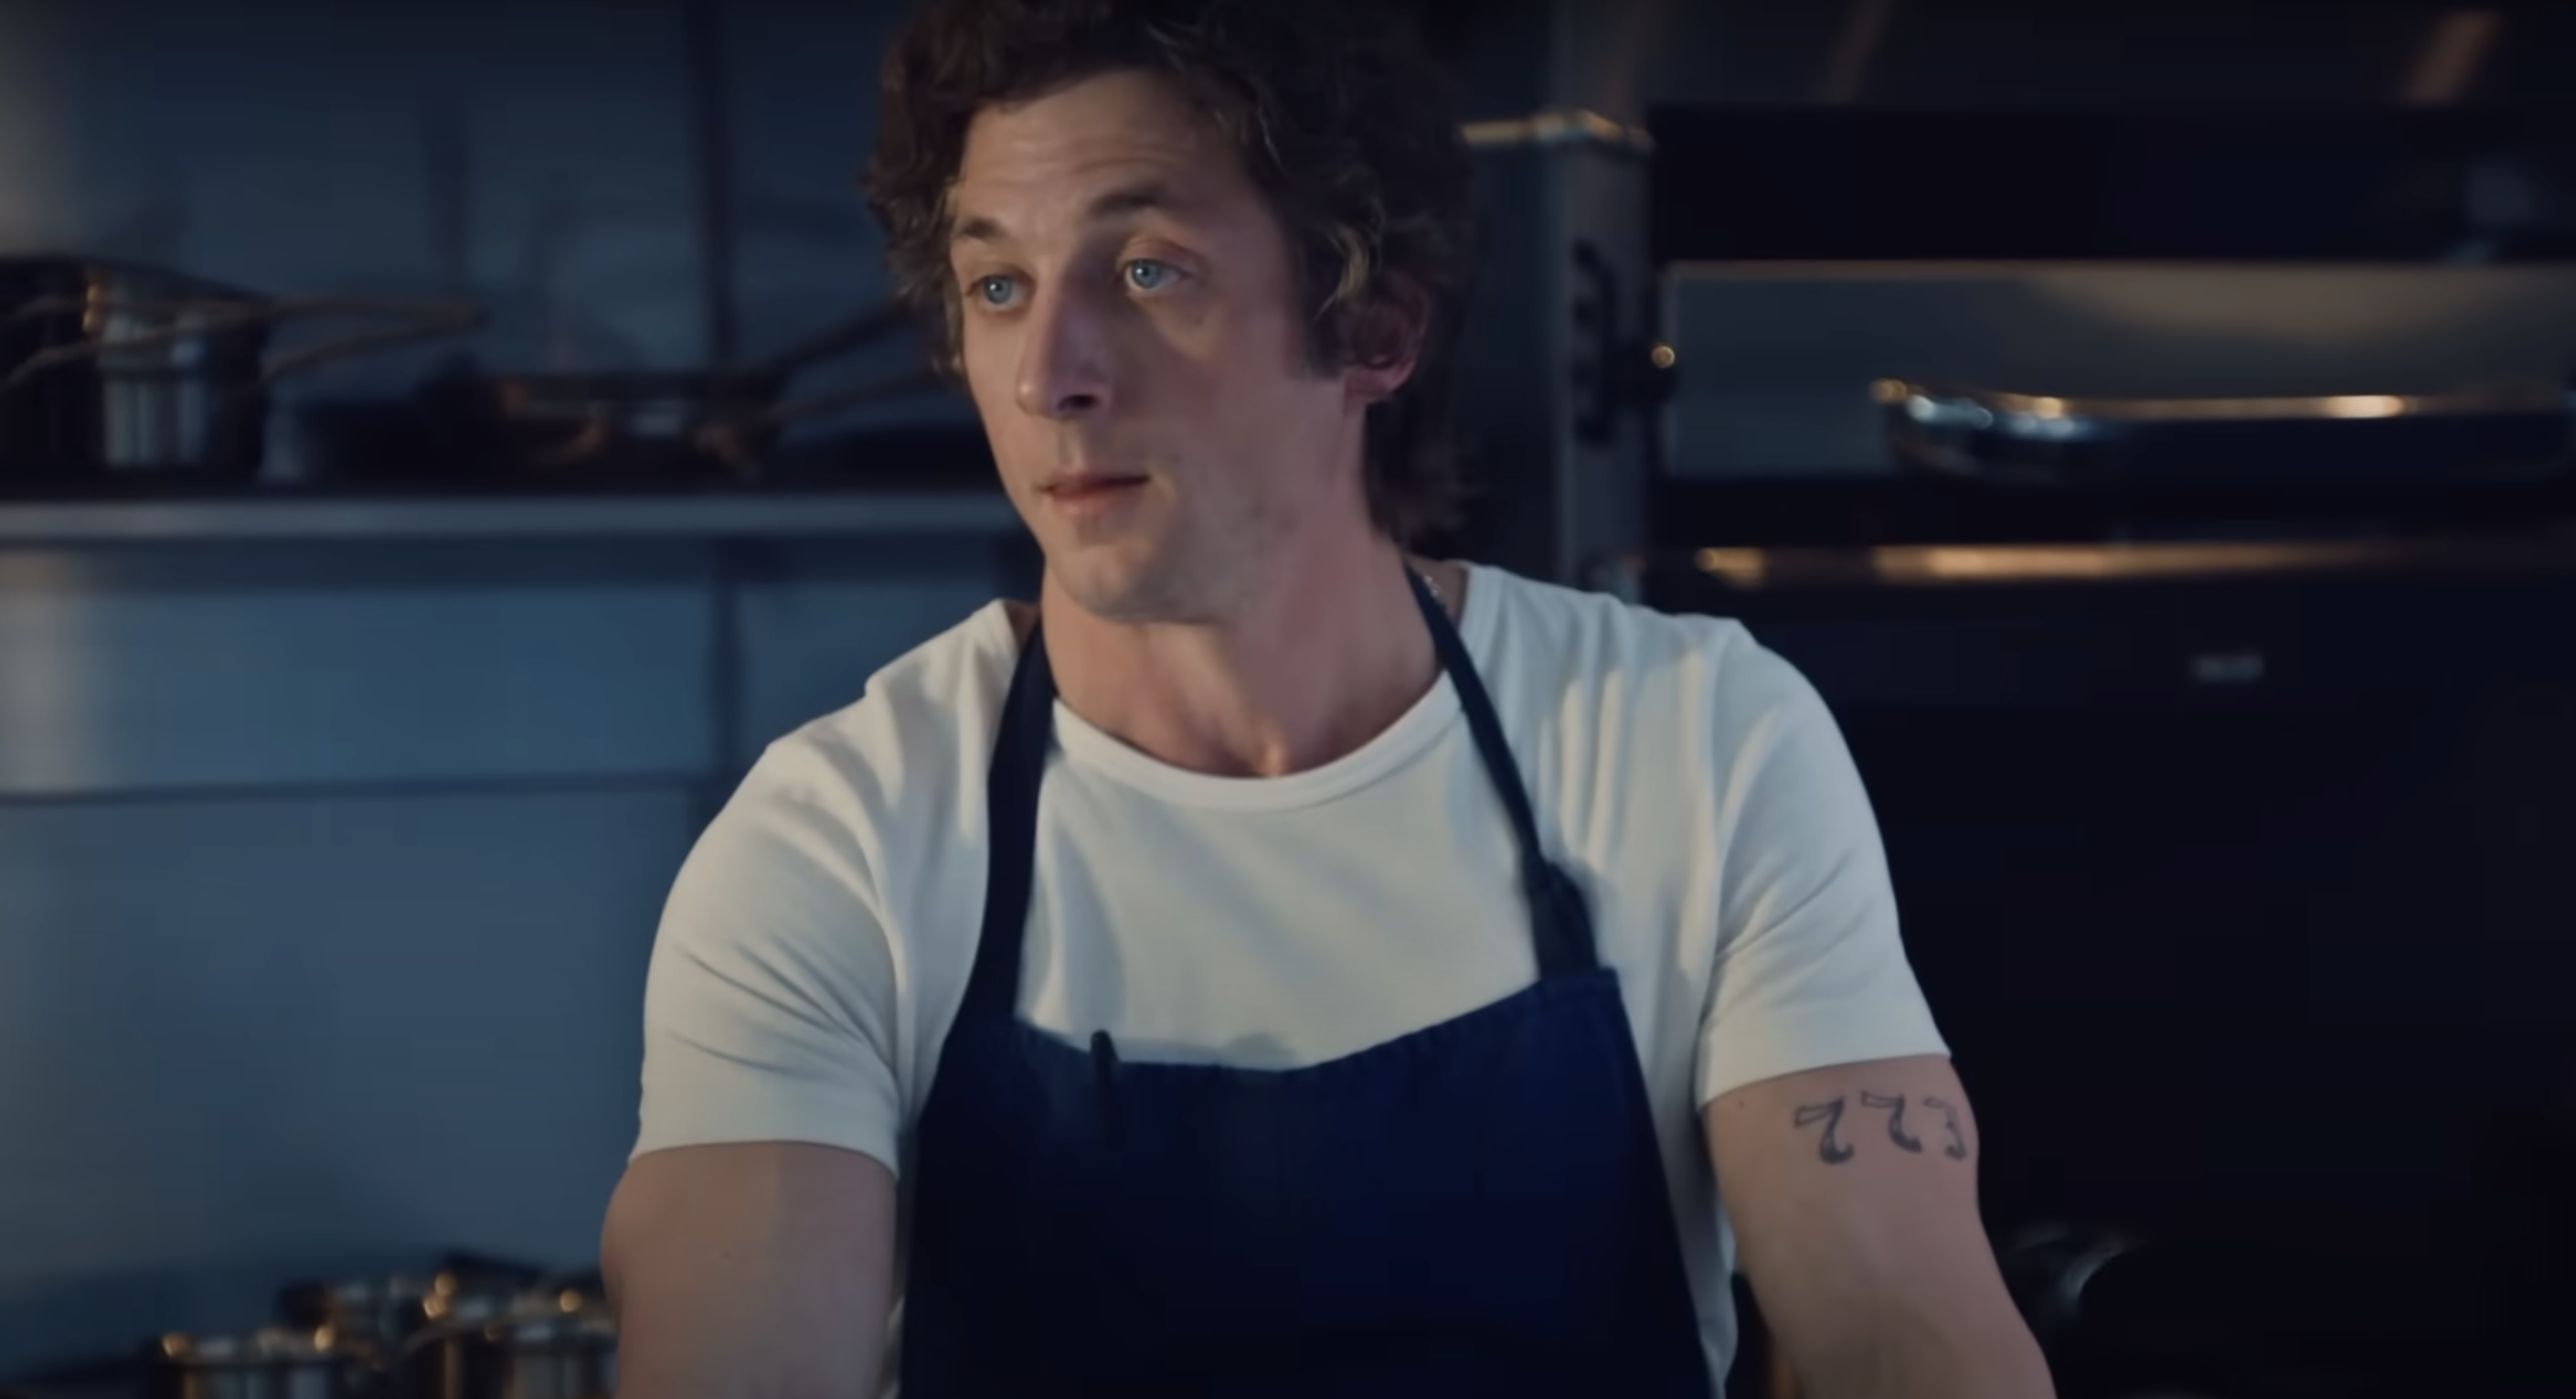 A screenshot from "The Bear:" main character Carmy, in a white tshirt and blue apron, stands behind a counter